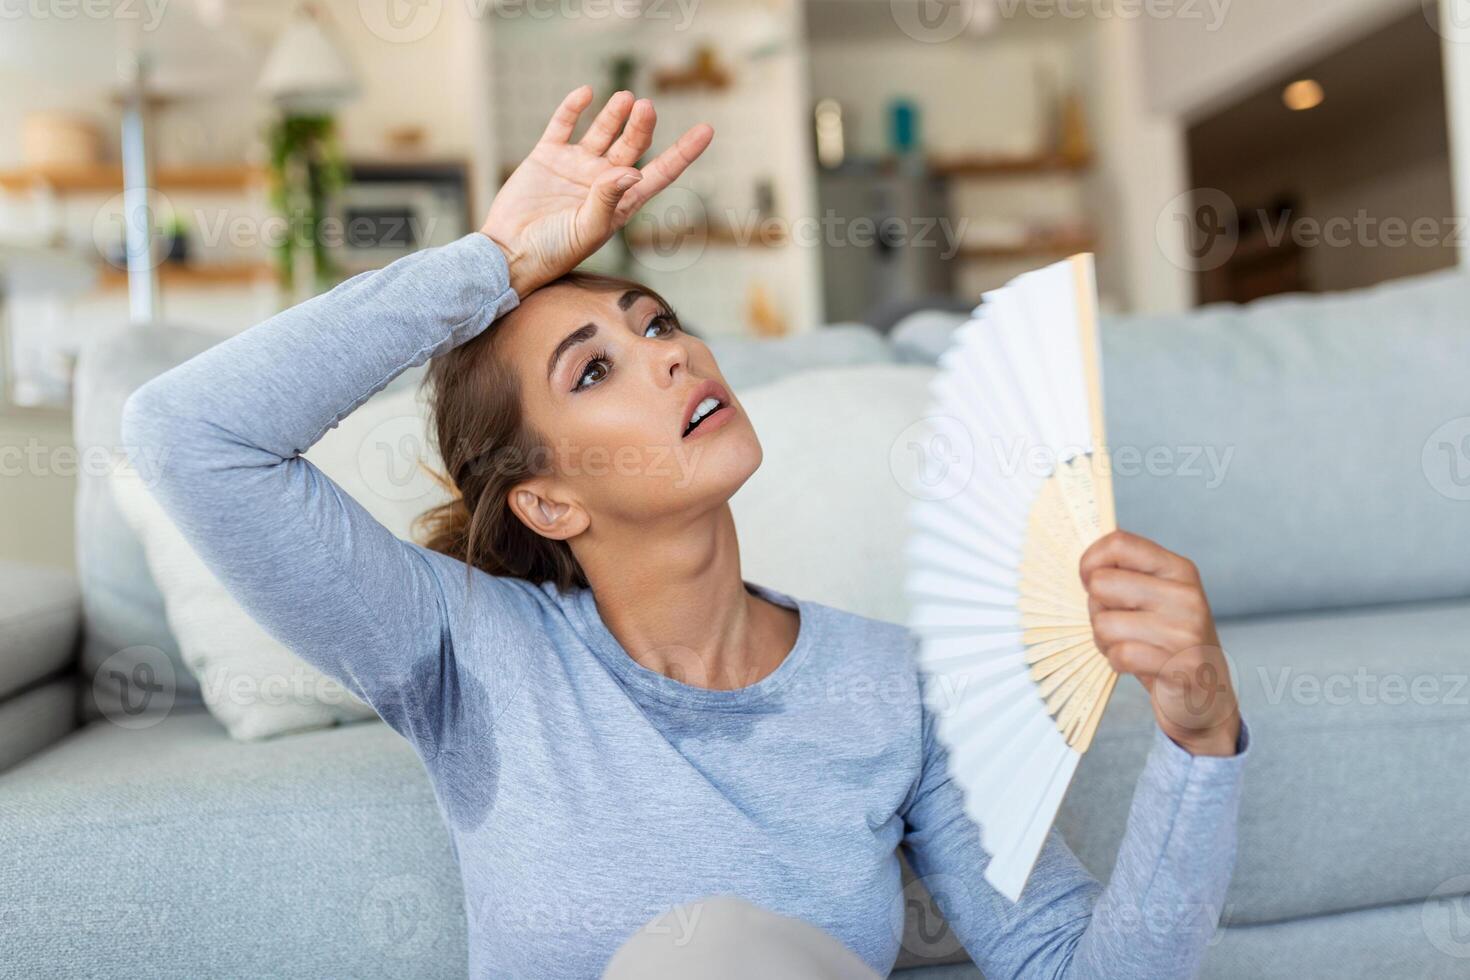 Woman puts head on sofa cushions feels sluggish due unbearable heat, waves hand fan cool herself, hot summer flat without air-conditioner climate control system concept photo